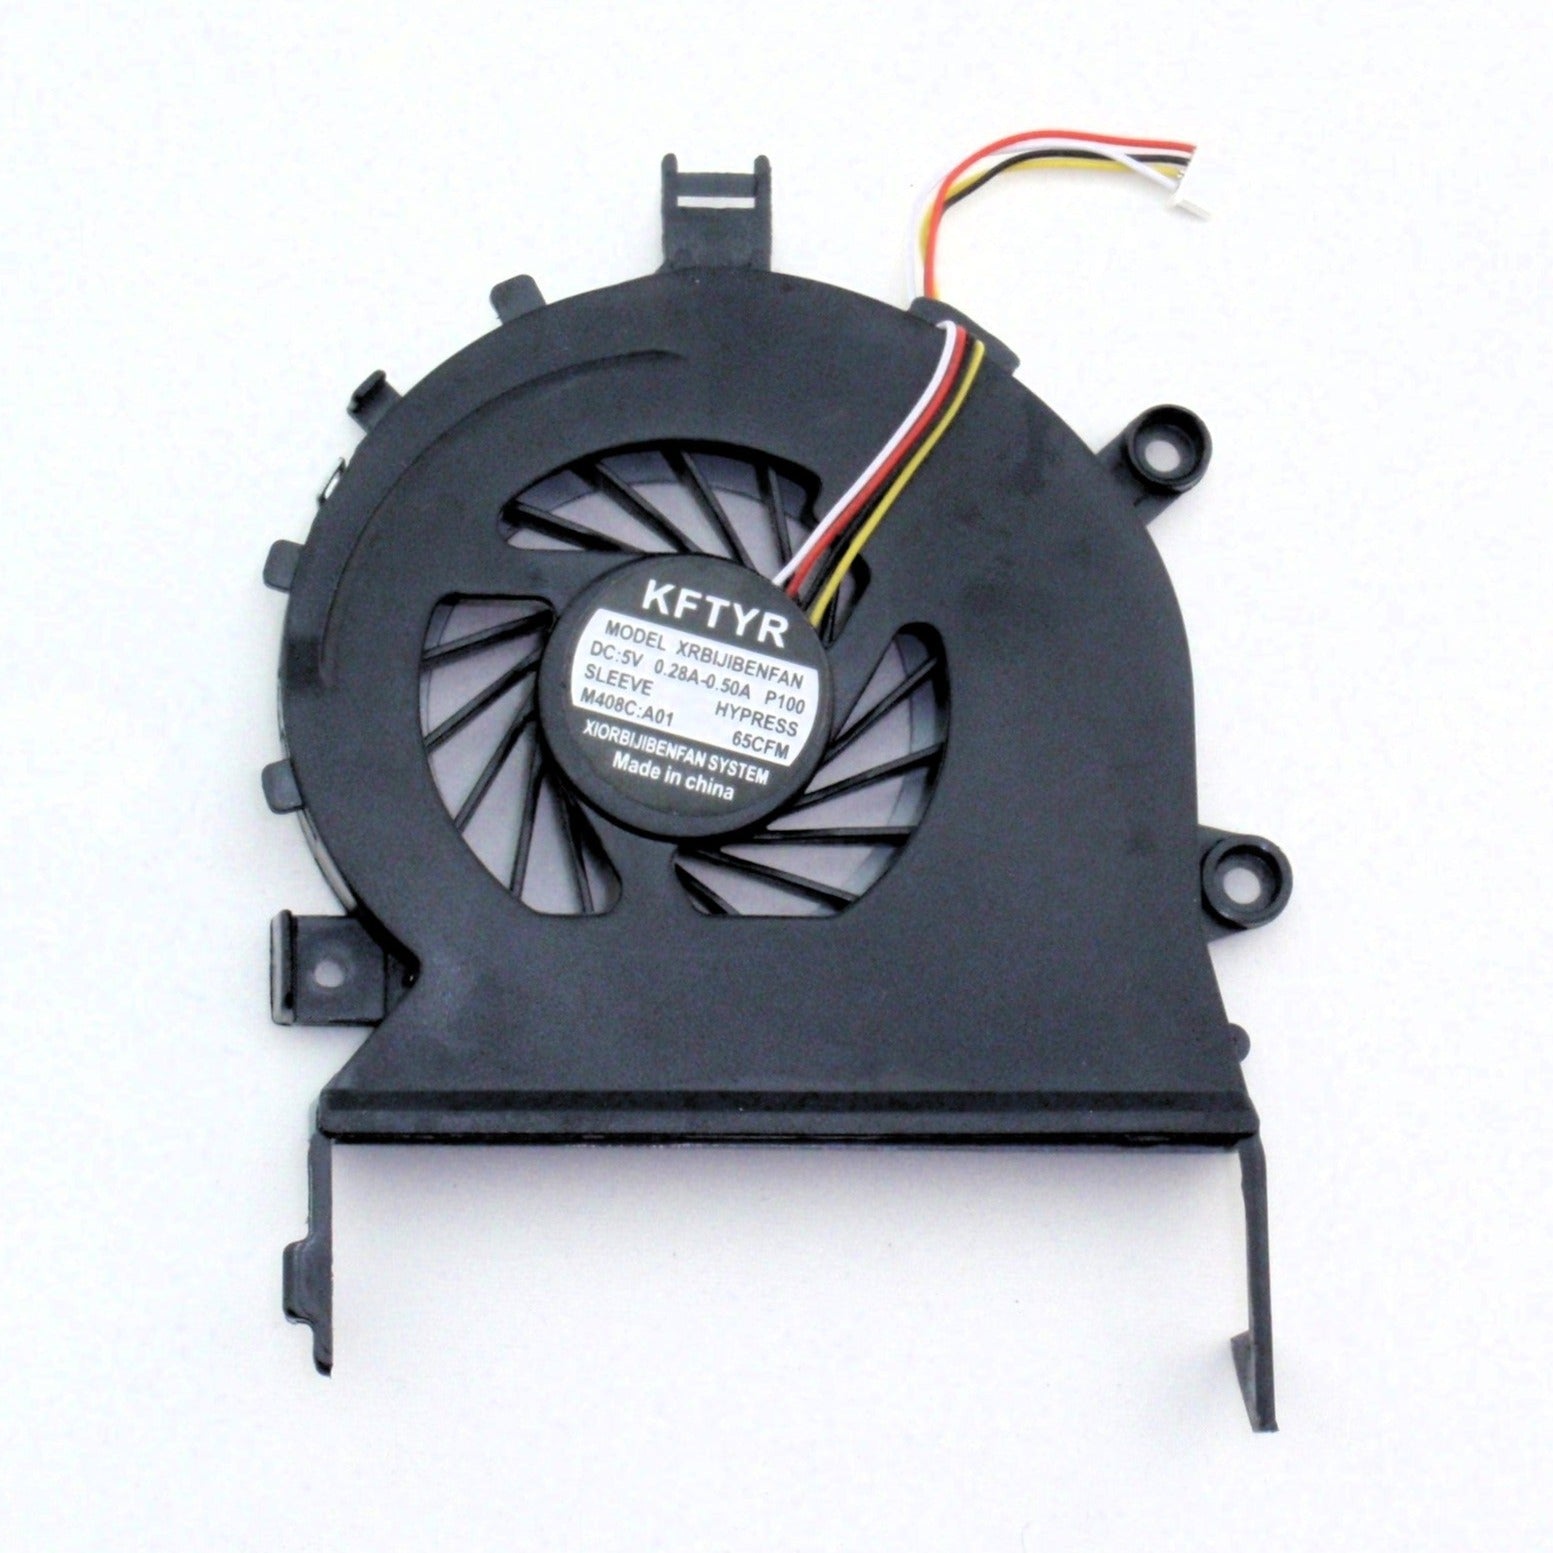 Acer New CPU Cooling Fan Aspire 4745 4745G 4745Z Timeline 4820 4820T 4820TG 5820 5820T 5820TZ AB8105HX-RDB